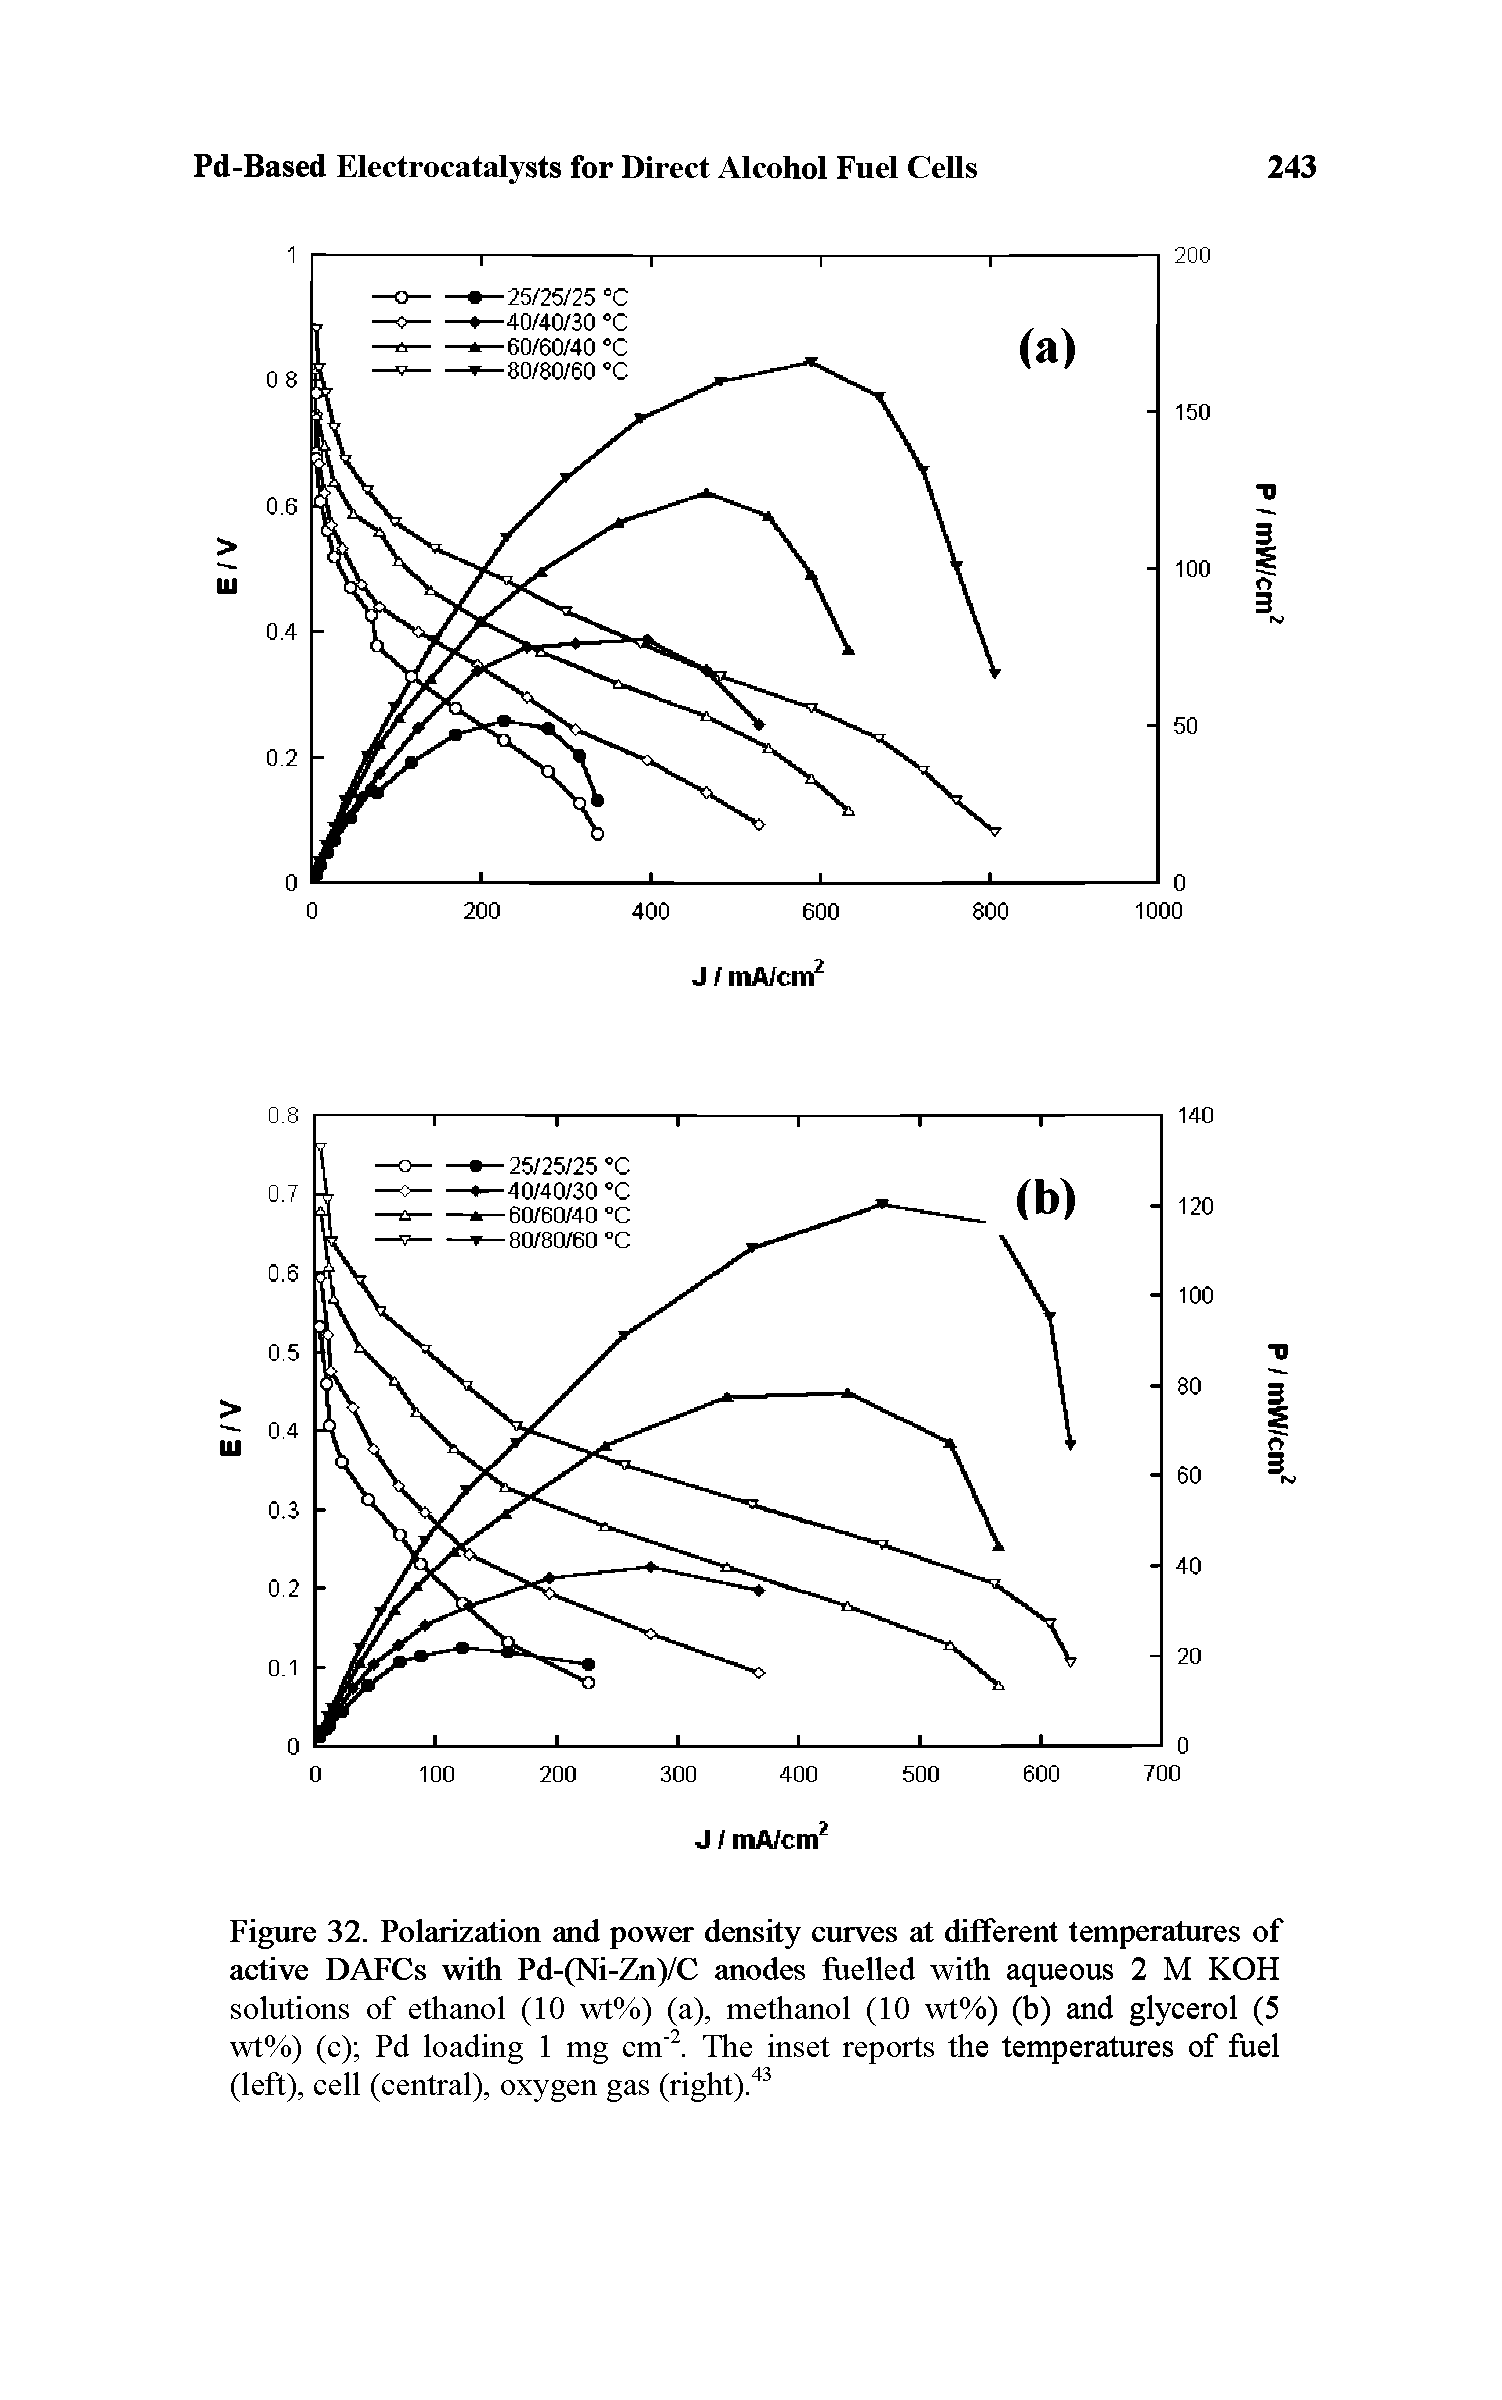 Figure 32. Polarization and power density curves at dilferent temperatures of active DAFCs with Pd-(Ni-Zn)/C anodes fuelled with aqueous 2 M KOH solutions of ethanol (10 vrt%) (a), methanol (10 vrt%) (b) and glycerol (5 wt%) (c) Pd loading 1 mg cm. The inset reports the temperatures of fuel (left), cell (central), oxygen gas (right). ...